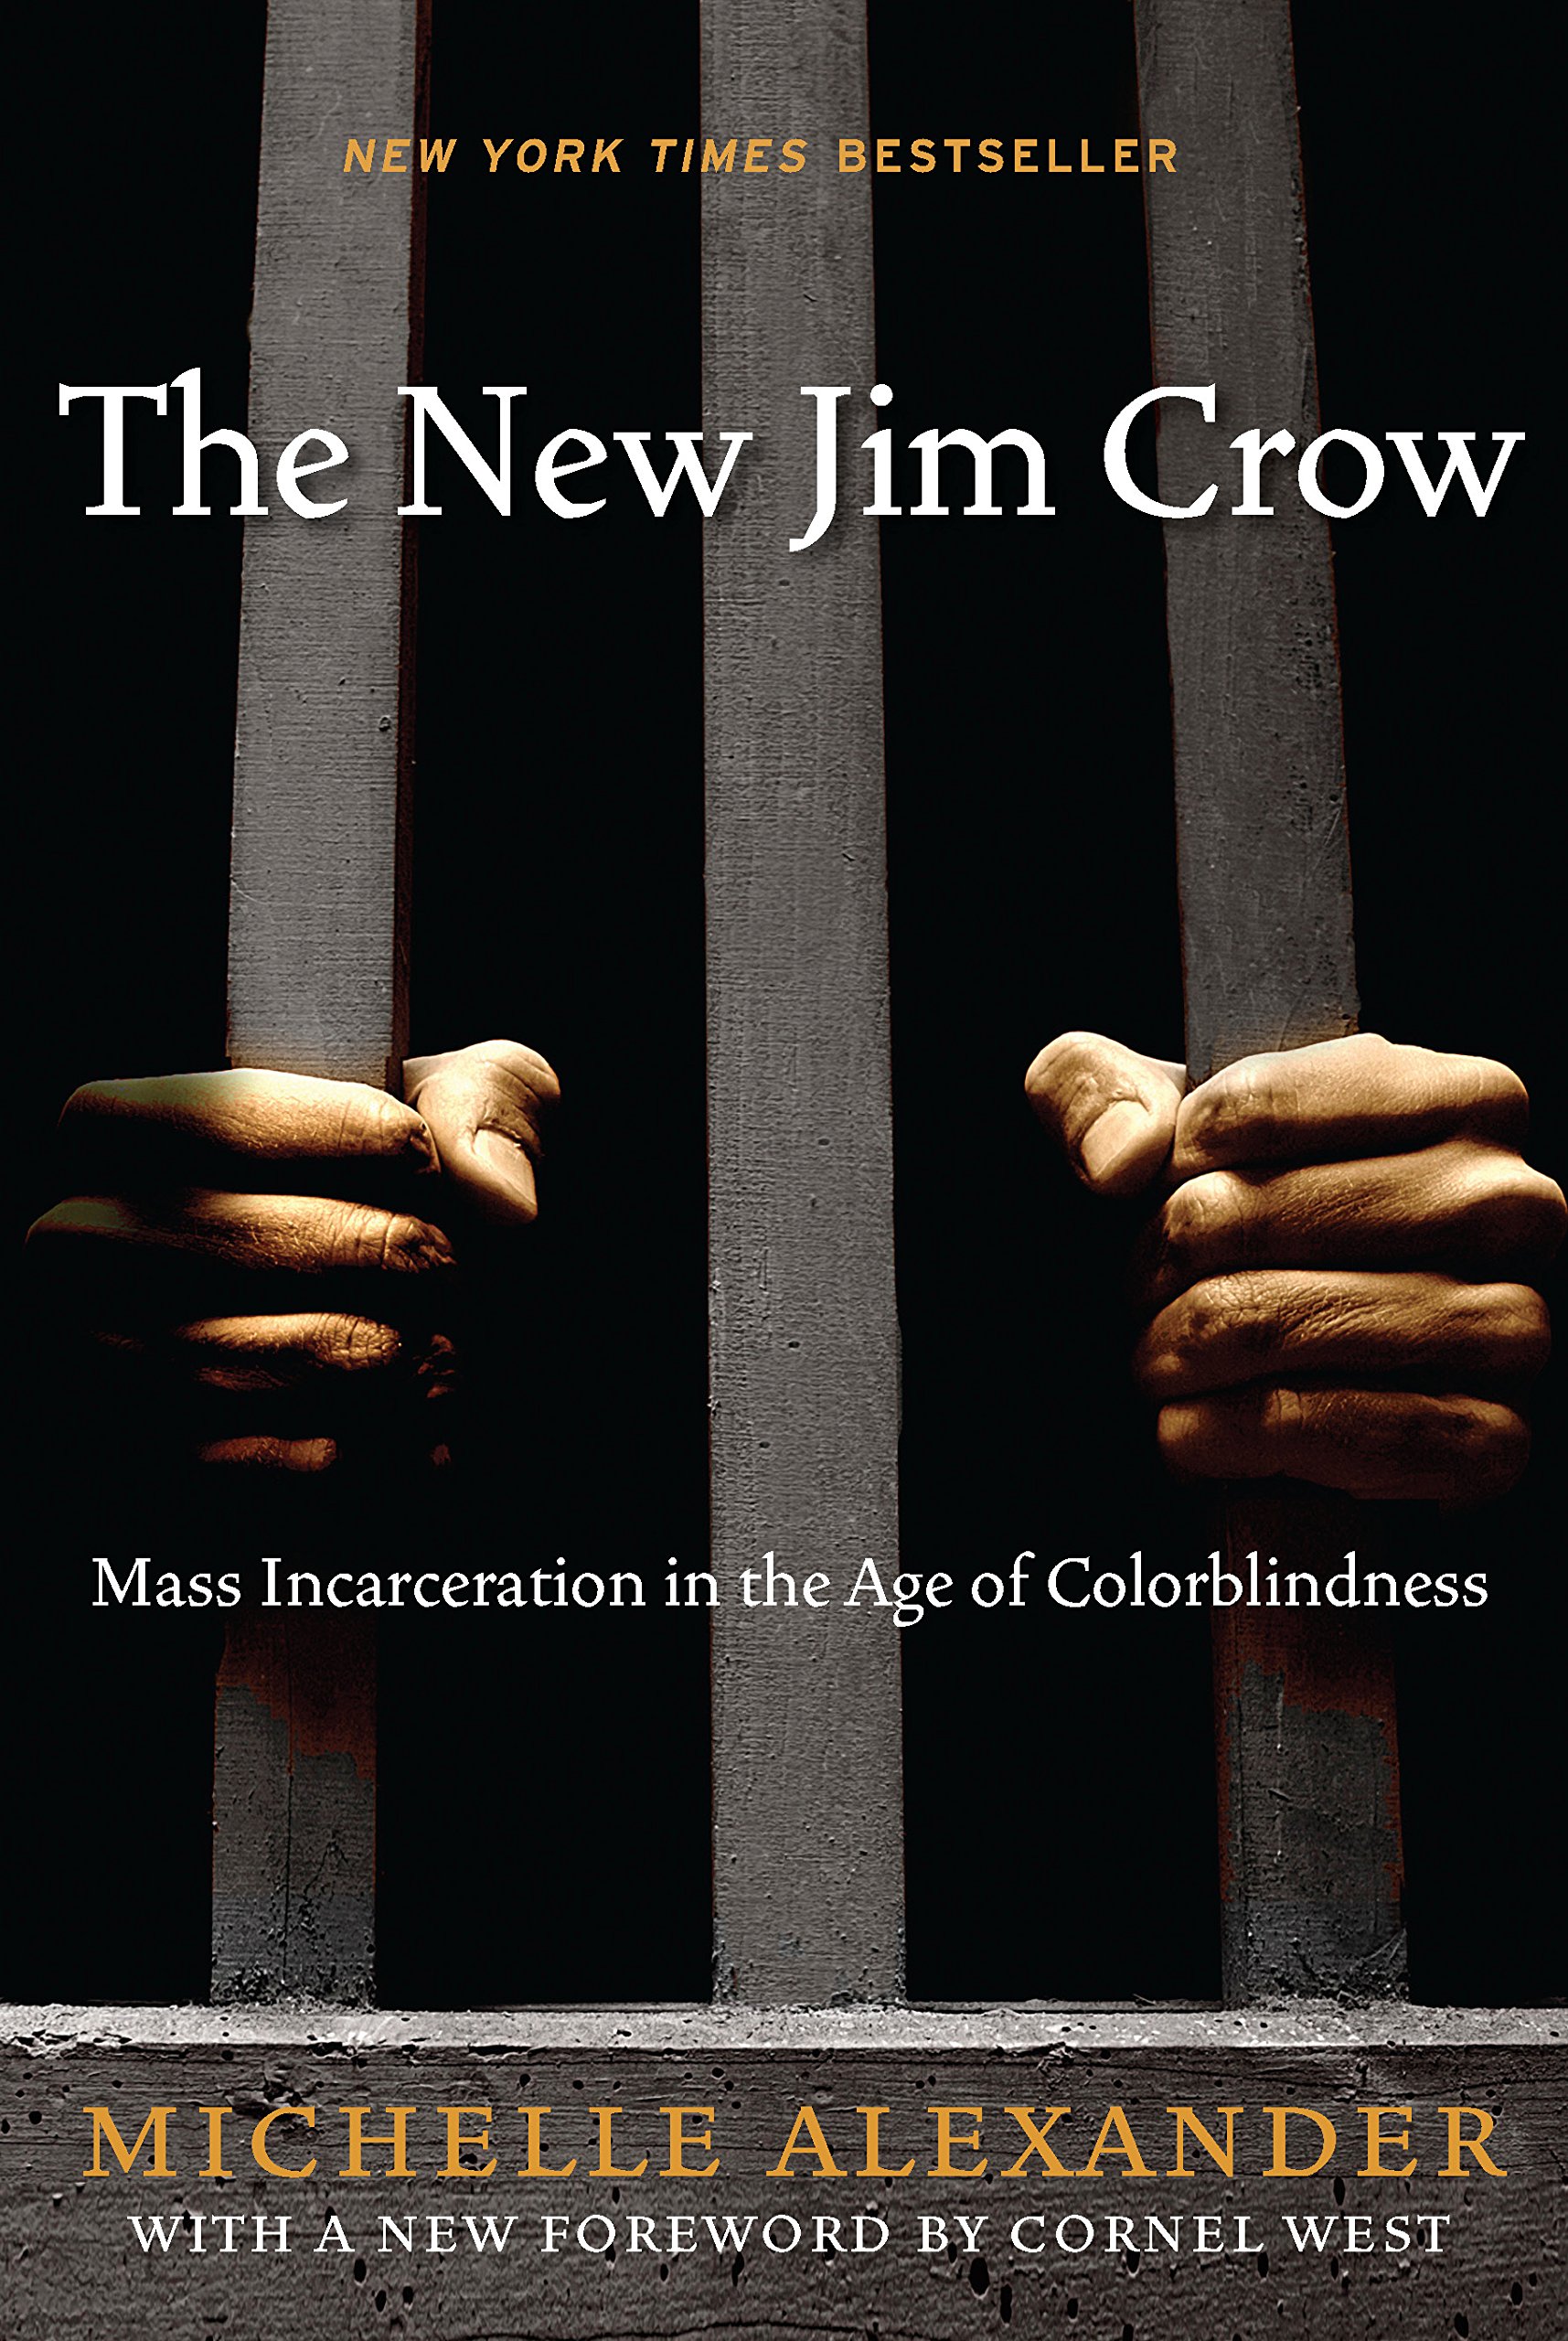 NYC Social Justice Book Club: The New Jim Crow by Michelle Alexander (POSTPONED)